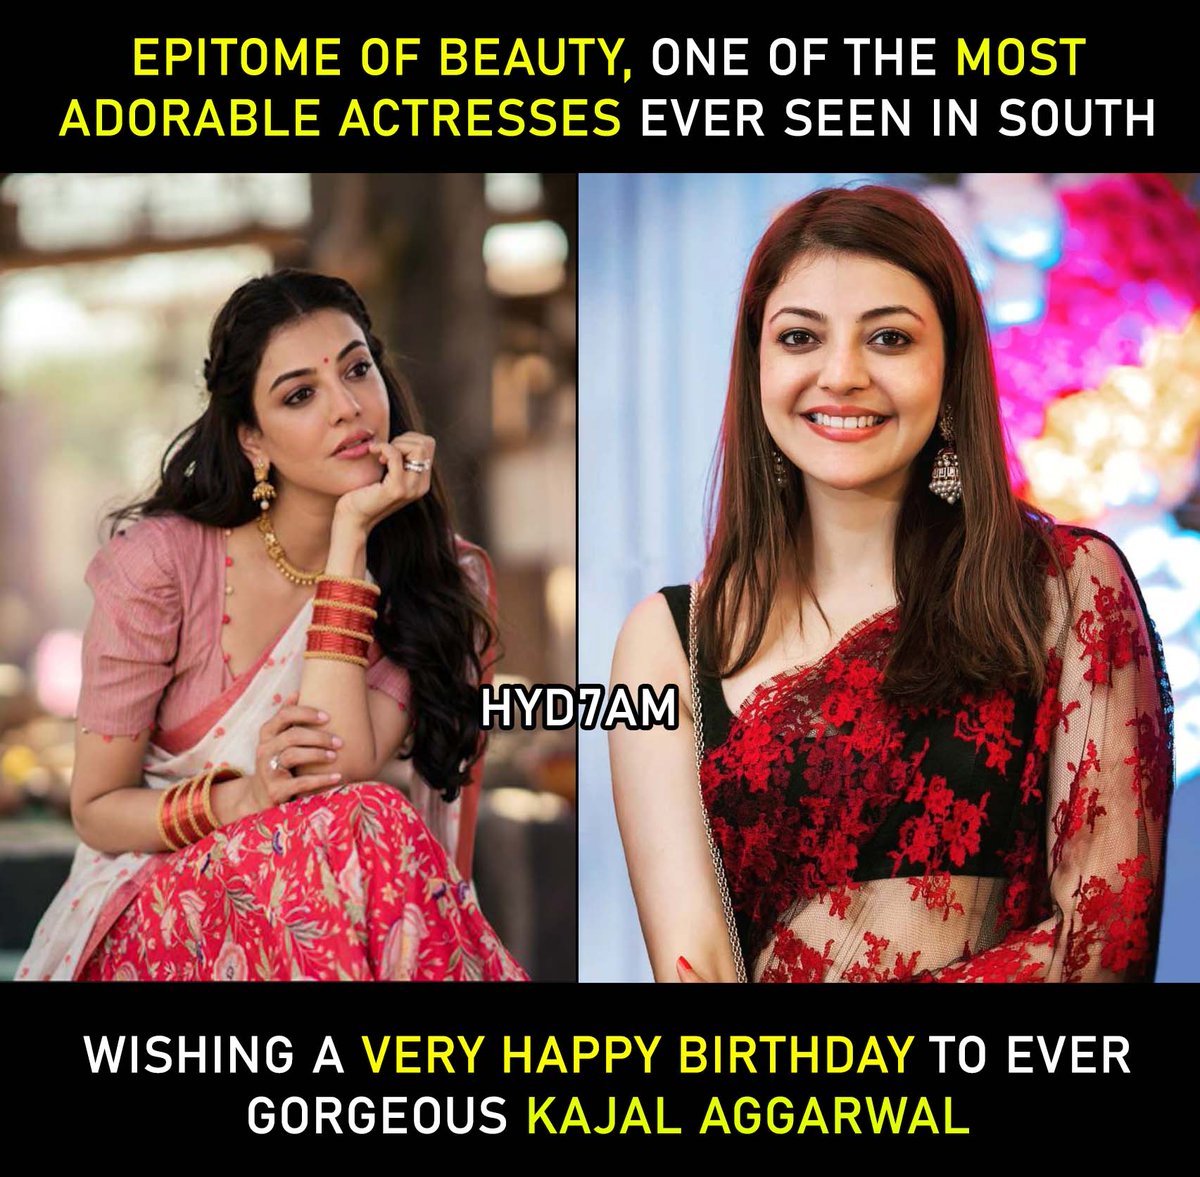 Wishing The Evergreen & Undisputed Queen Of Telugu  Cinema @MsKajalAggarwal, A Very Happy Birthday    

All The Very Best For Future Endeavours  

#HBDKajal #KajalAggarwal #Kajal #KajalAgarwal #HappyBirthdayKajalAggarwal

Follow:- @hyd7am